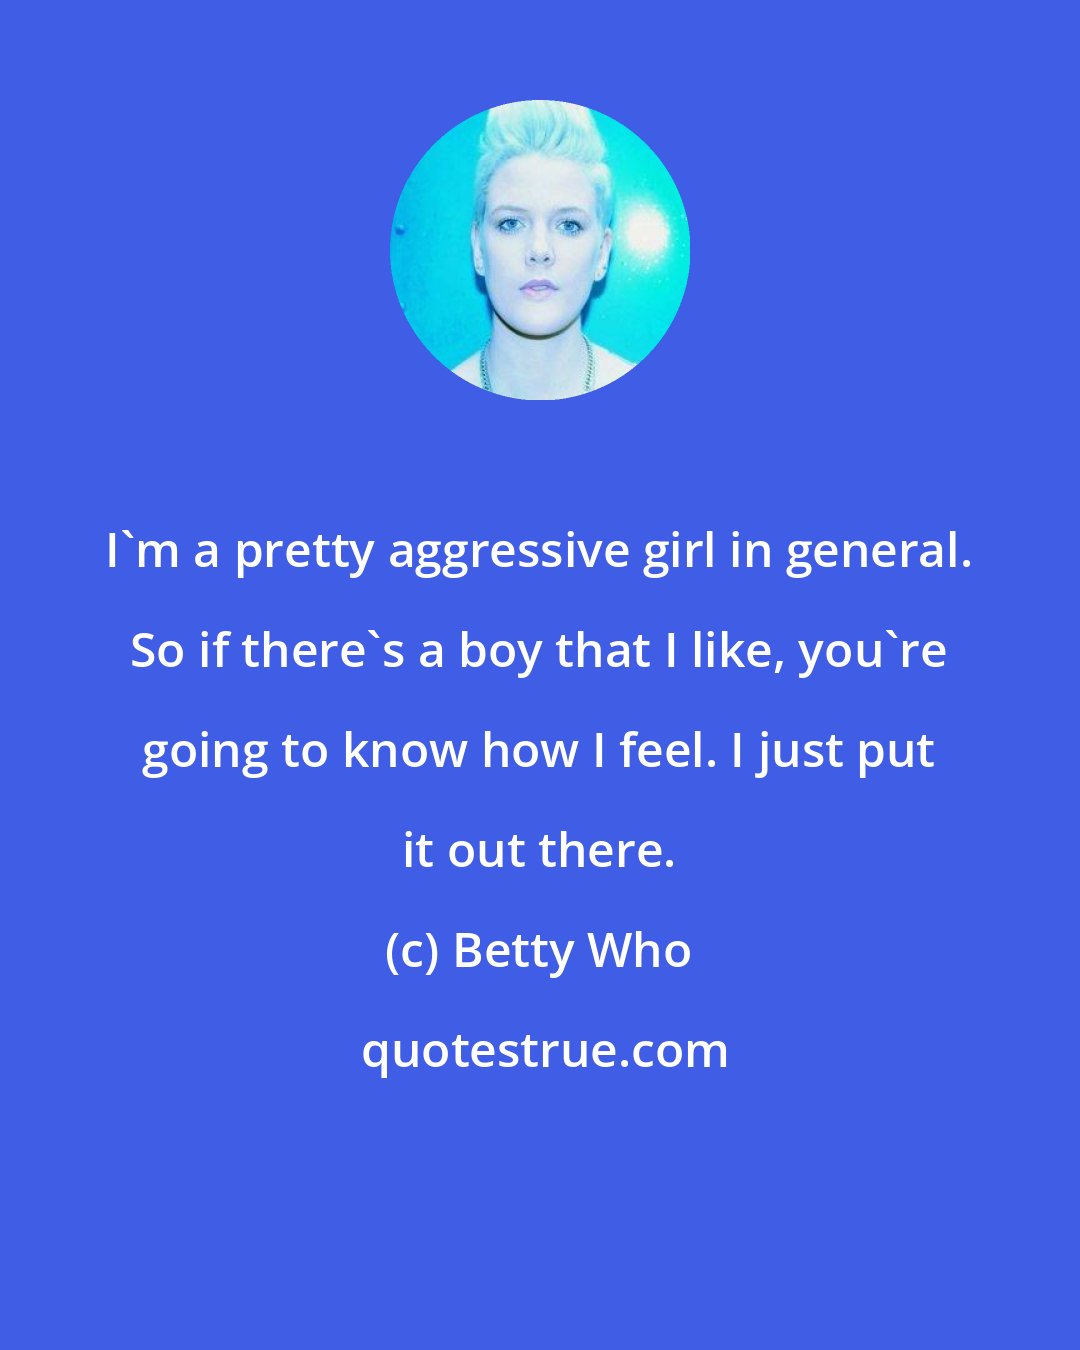 Betty Who: I'm a pretty aggressive girl in general. So if there's a boy that I like, you're going to know how I feel. I just put it out there.